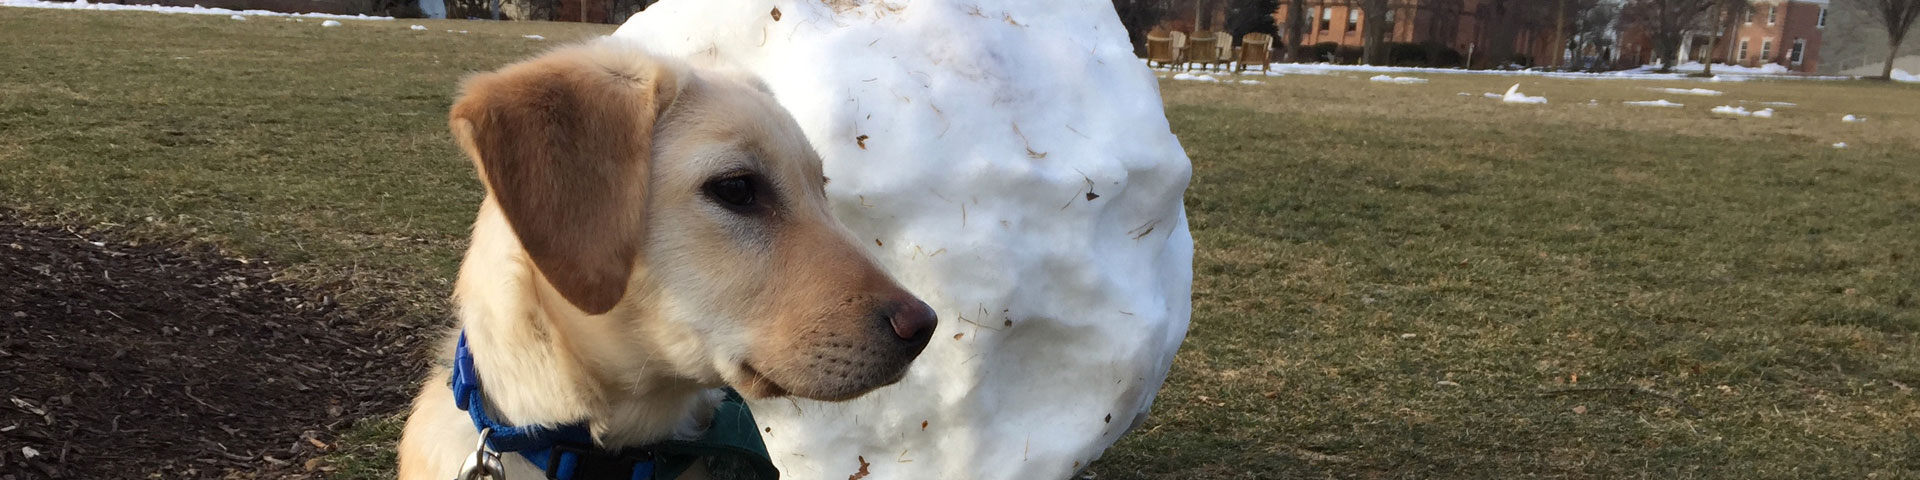 A yellow Labrador puppy sits in front of a snow boulder as big as himself. The snowball rests on the grass of a field.